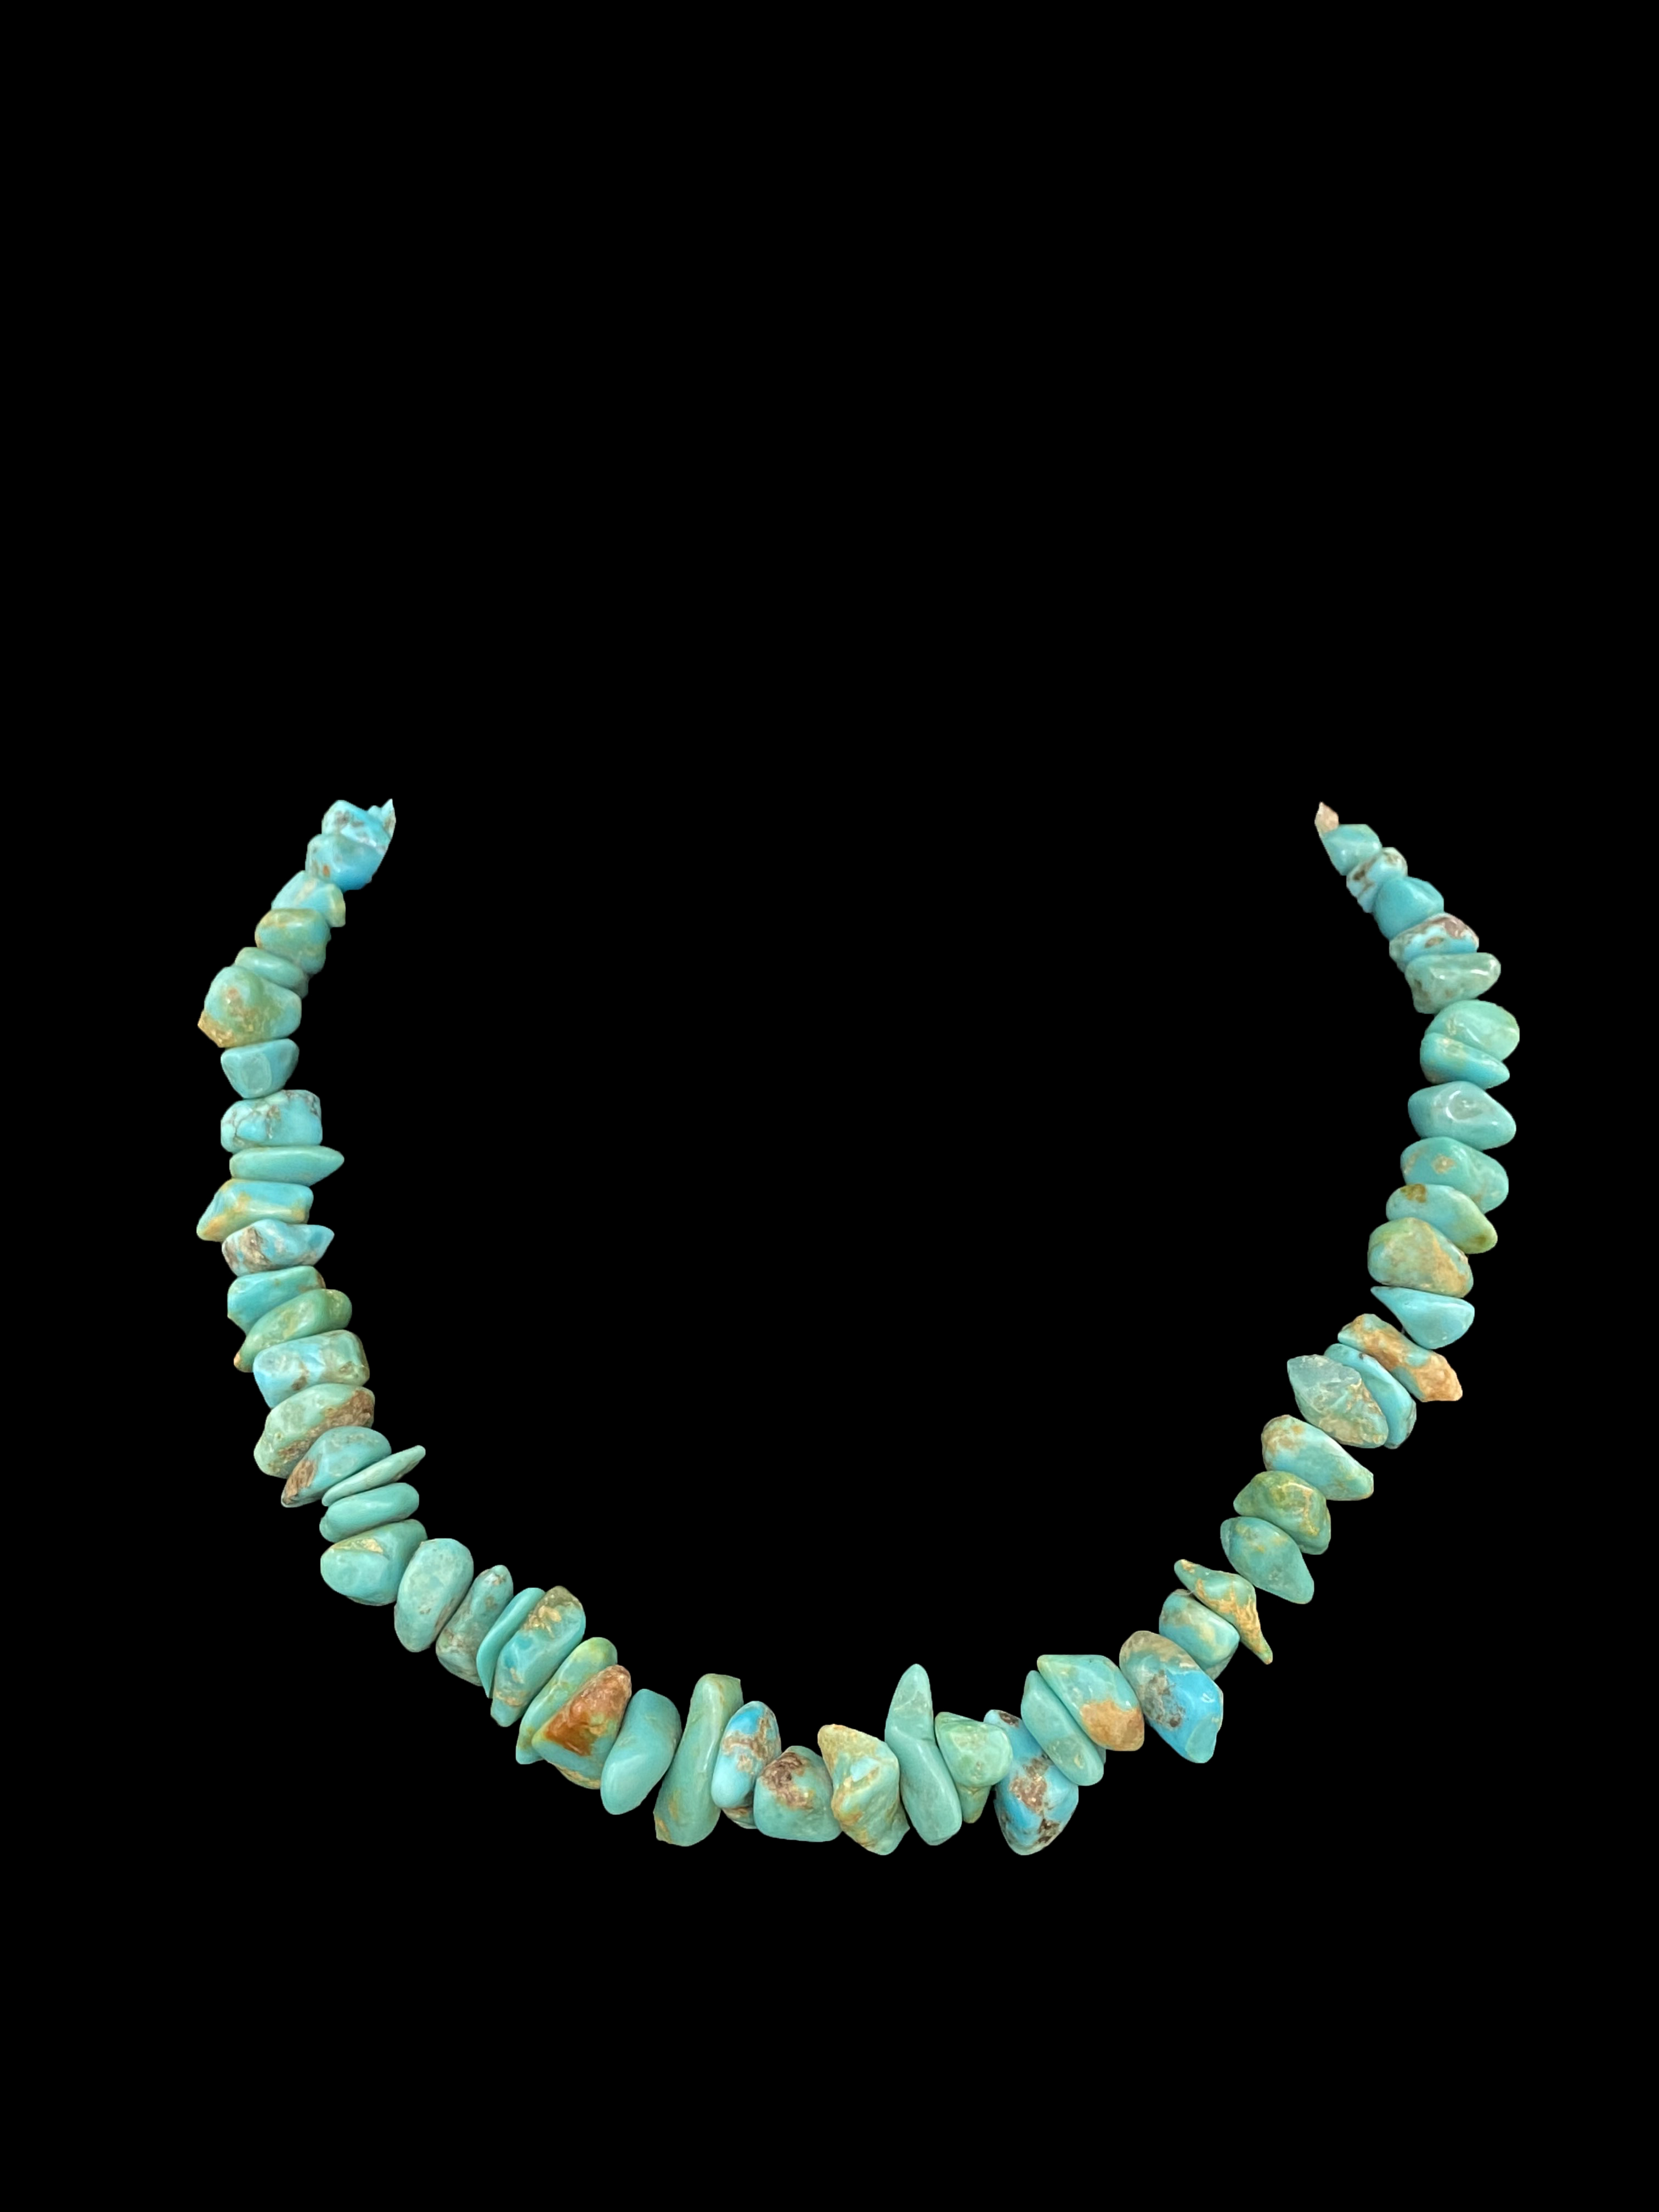 Choker of Turquoise Nuggets